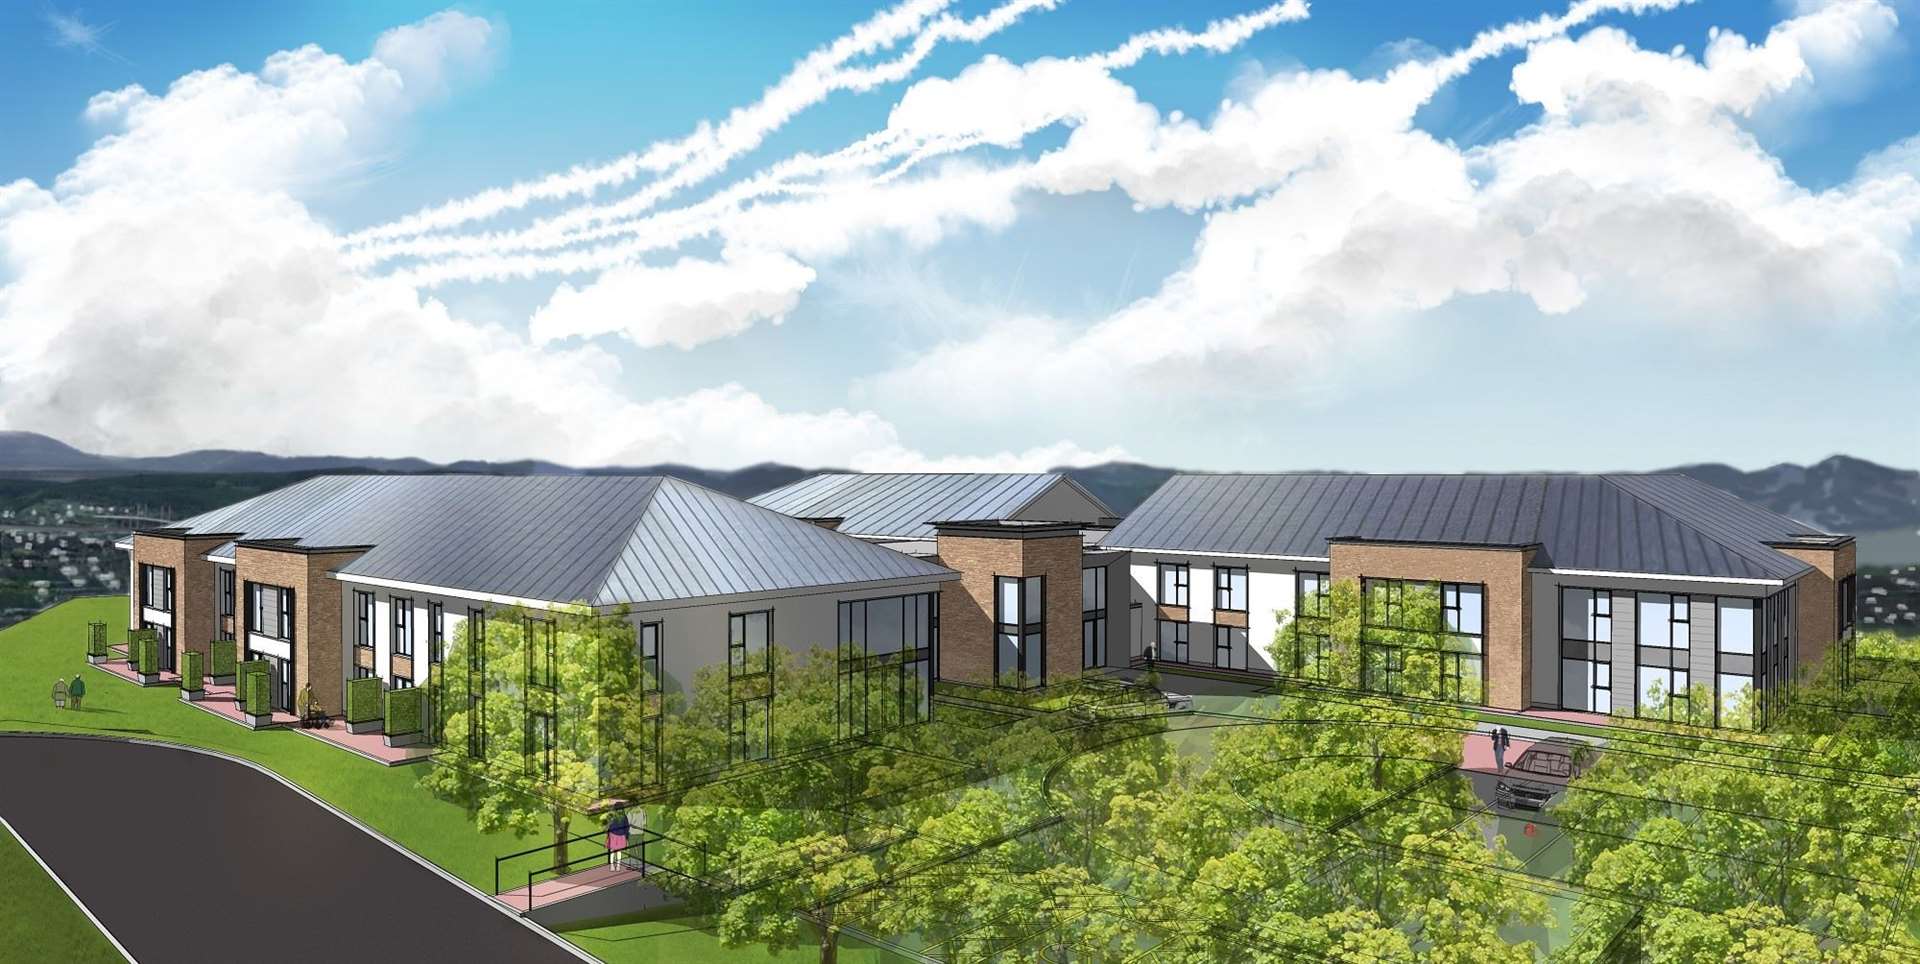 Parklands new multimillion pound care home in Inverness.